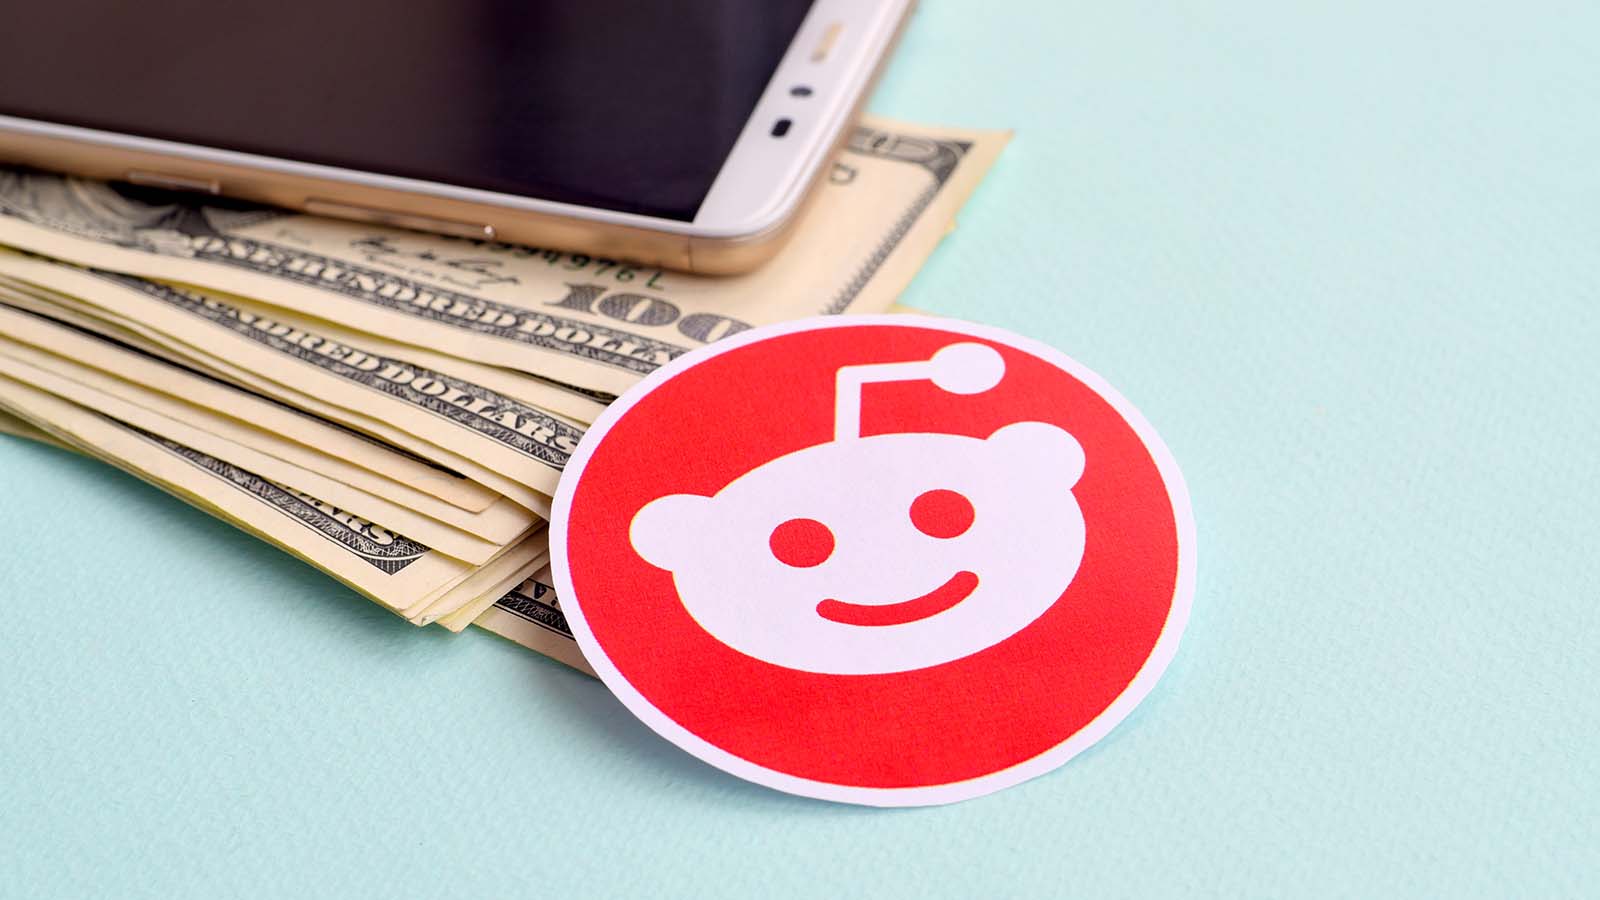 8 Hot Reddit Stocks That Could Be the Next Big Meme InvestorPlace